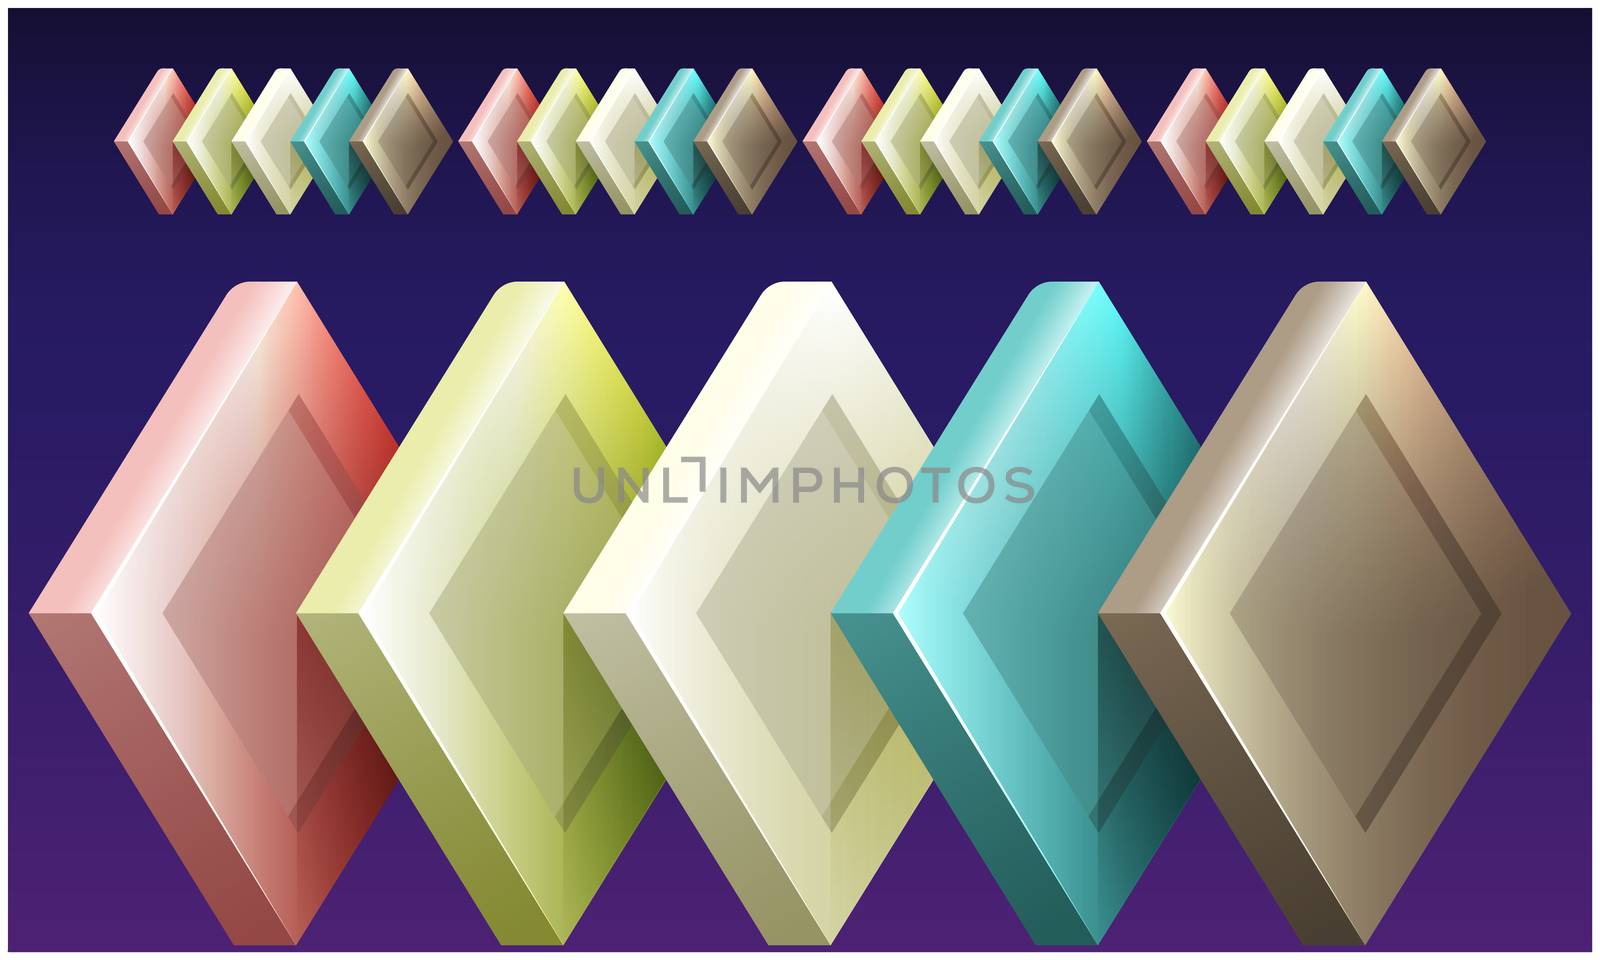 digital textile design of diamond boxes on abstract background by aanavcreationsplus